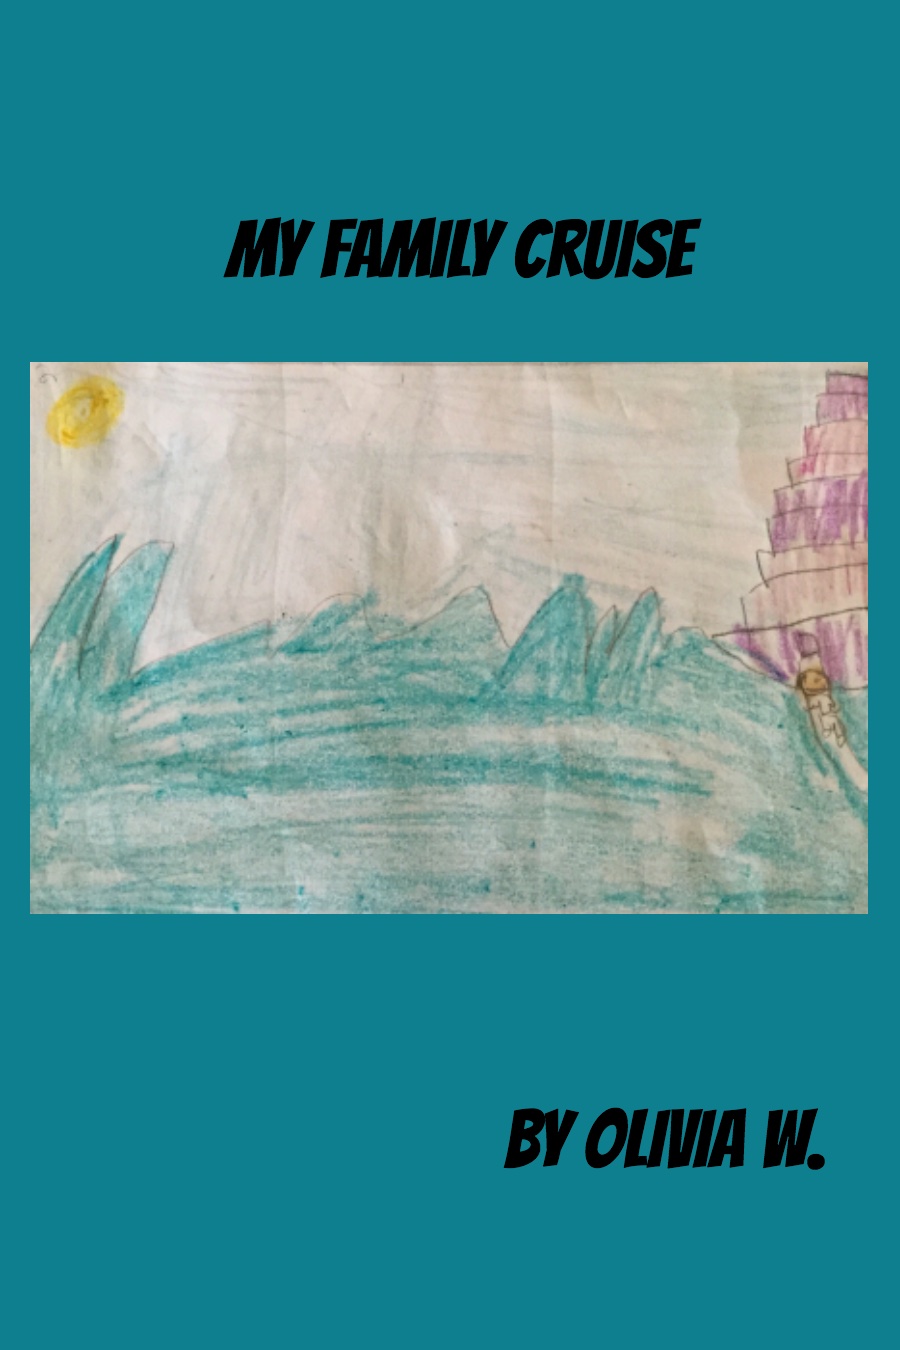 My Family Cruise by Olivia W